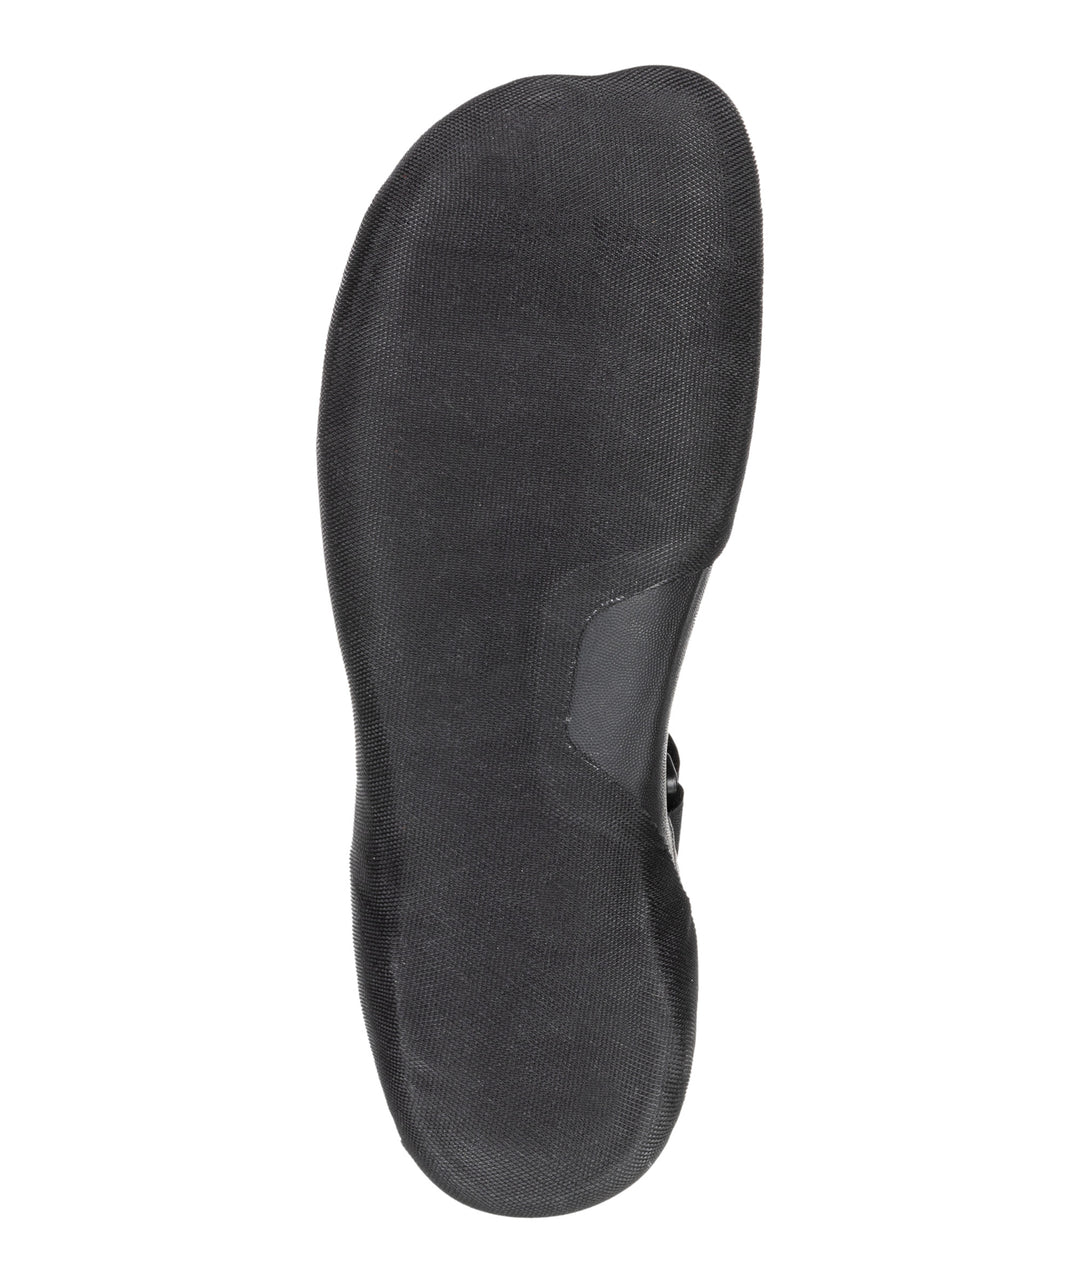 Everyday Sessions 3mm Round Toe Wetsuit Boots